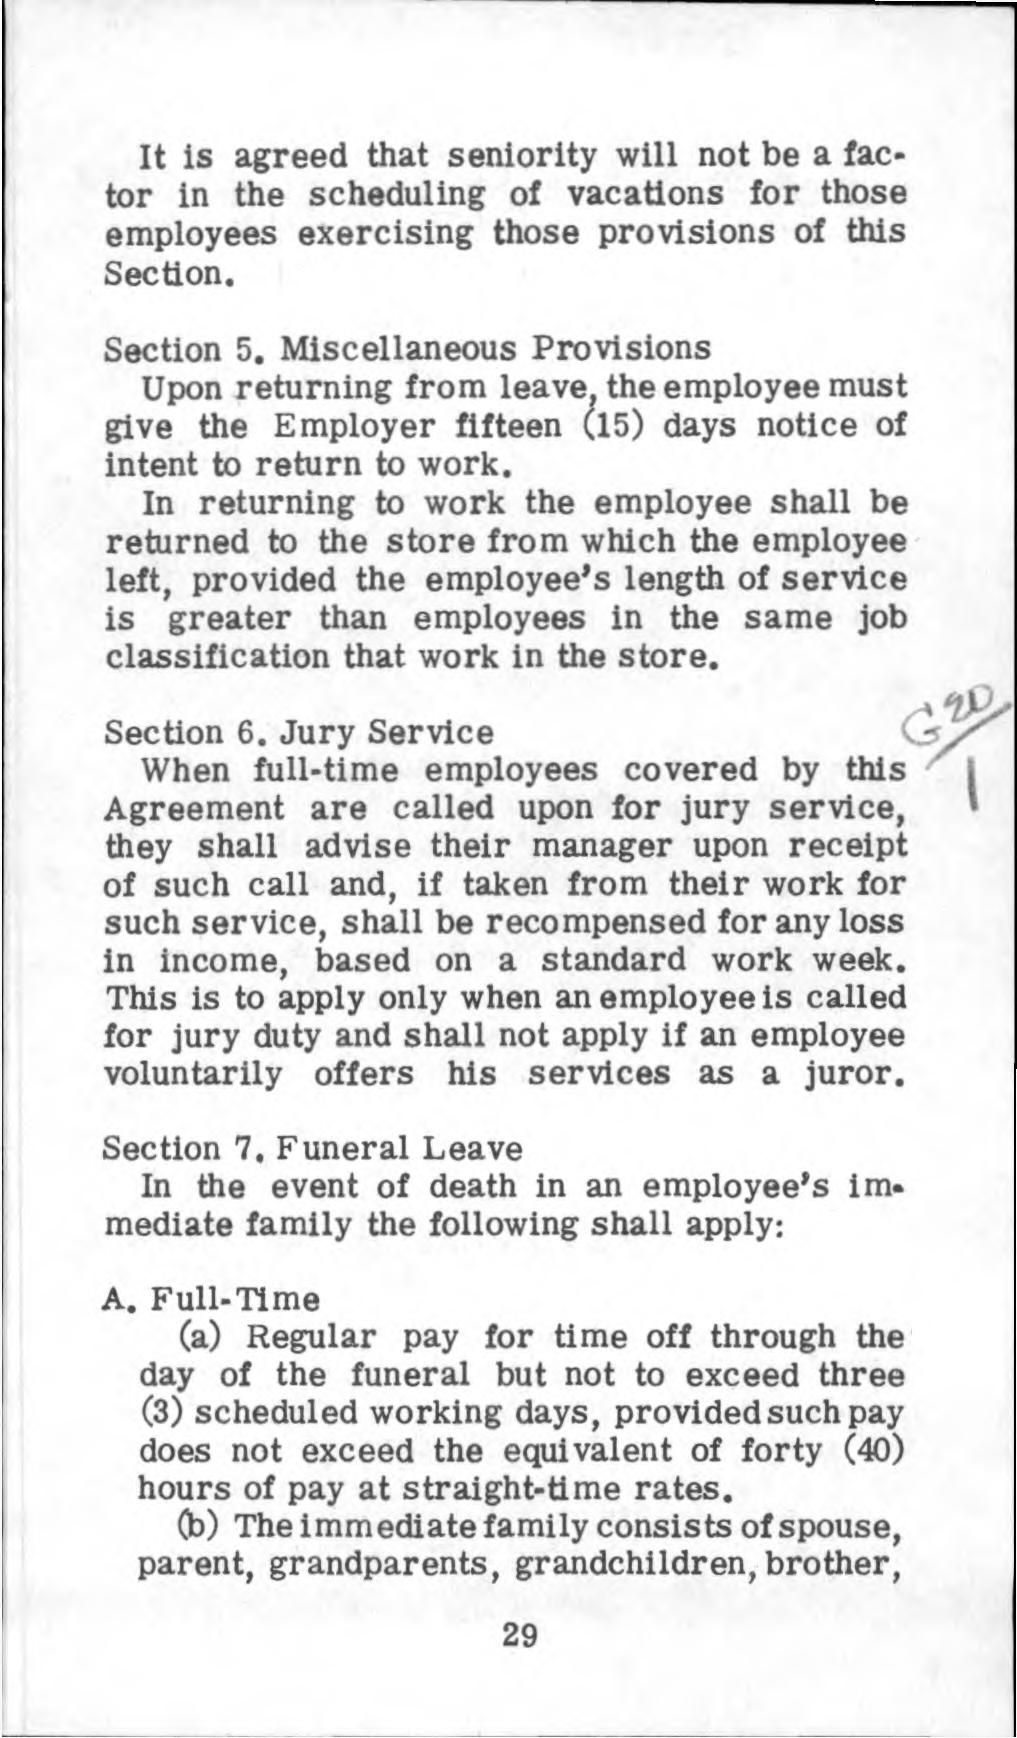 It is agreed that seniority will not be a factor in the scheduling of vacations for those employees exercising those provisions of this Section. Section 5.